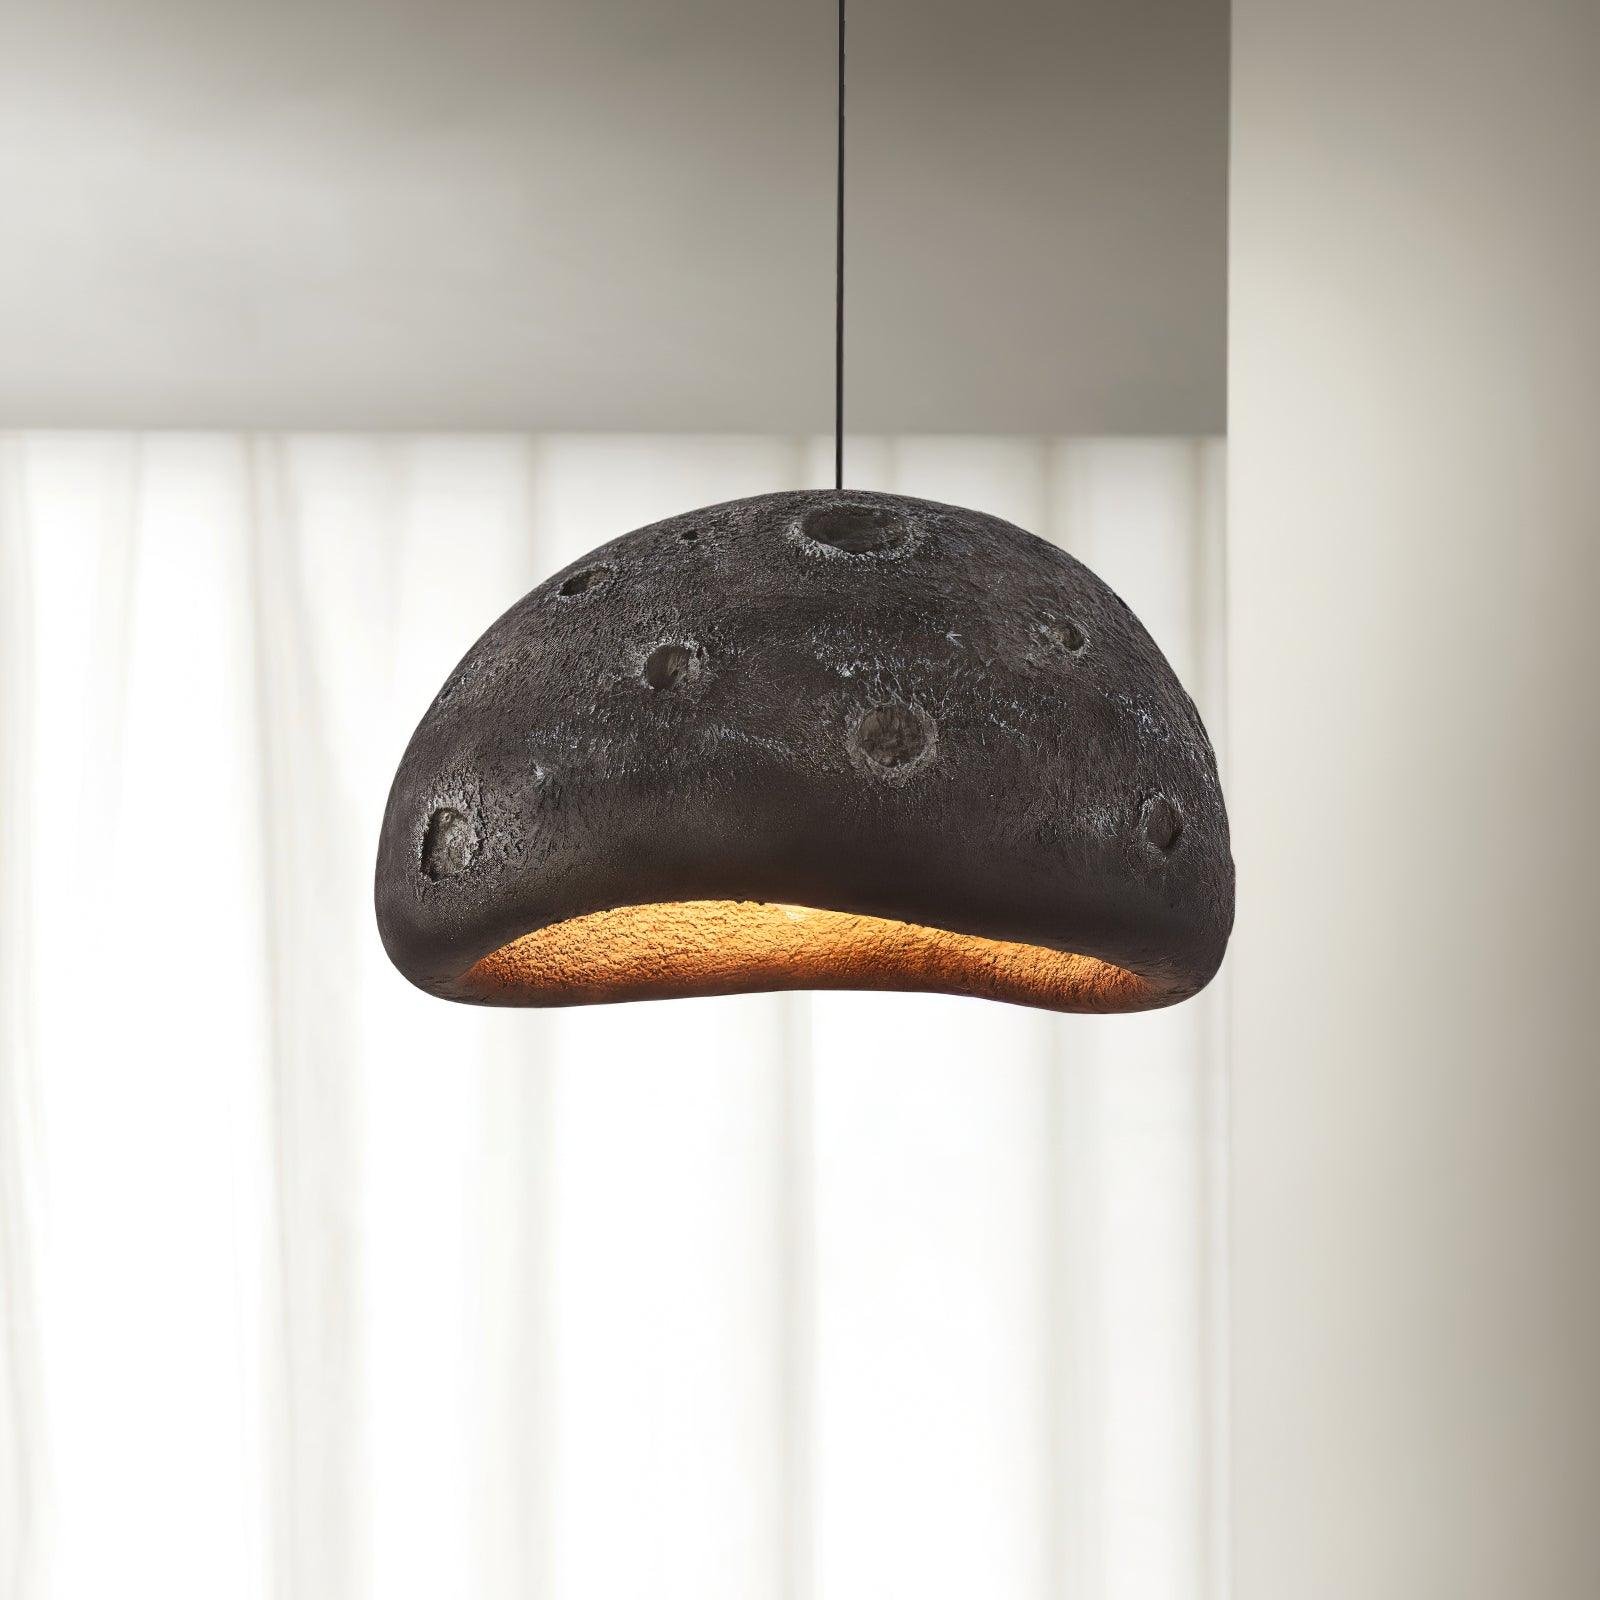 Black Blue Planet Pendant Lamp measuring 23.6 inches in diameter and 11.8 inches in height, or 60cm x 30cm in dimensions